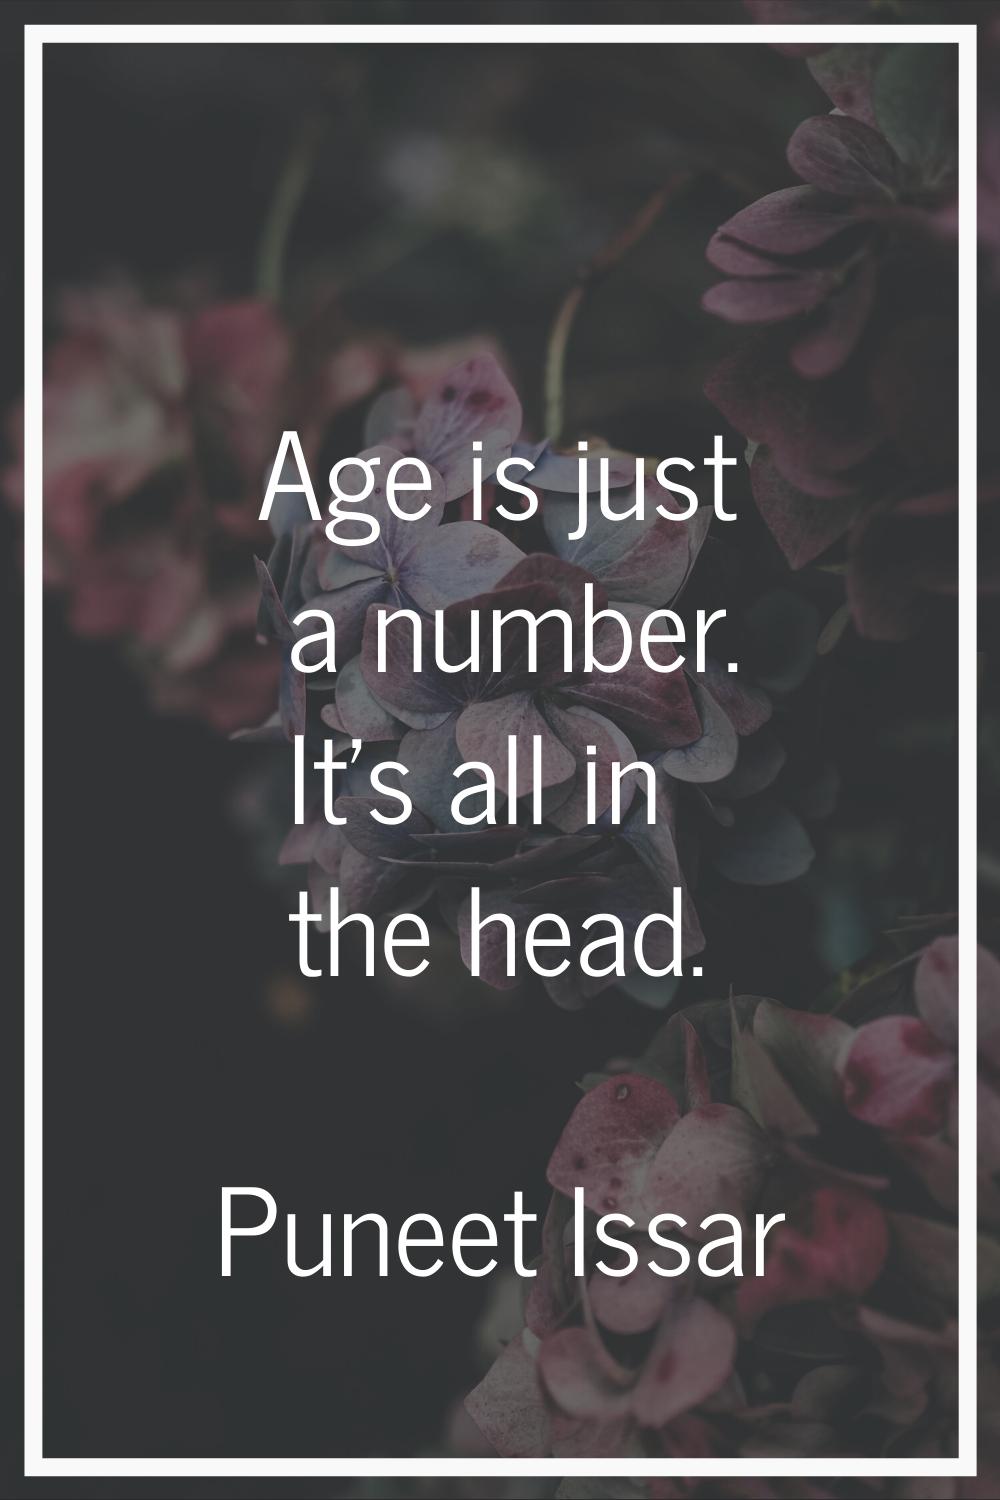 Age is just a number. It's all in the head.